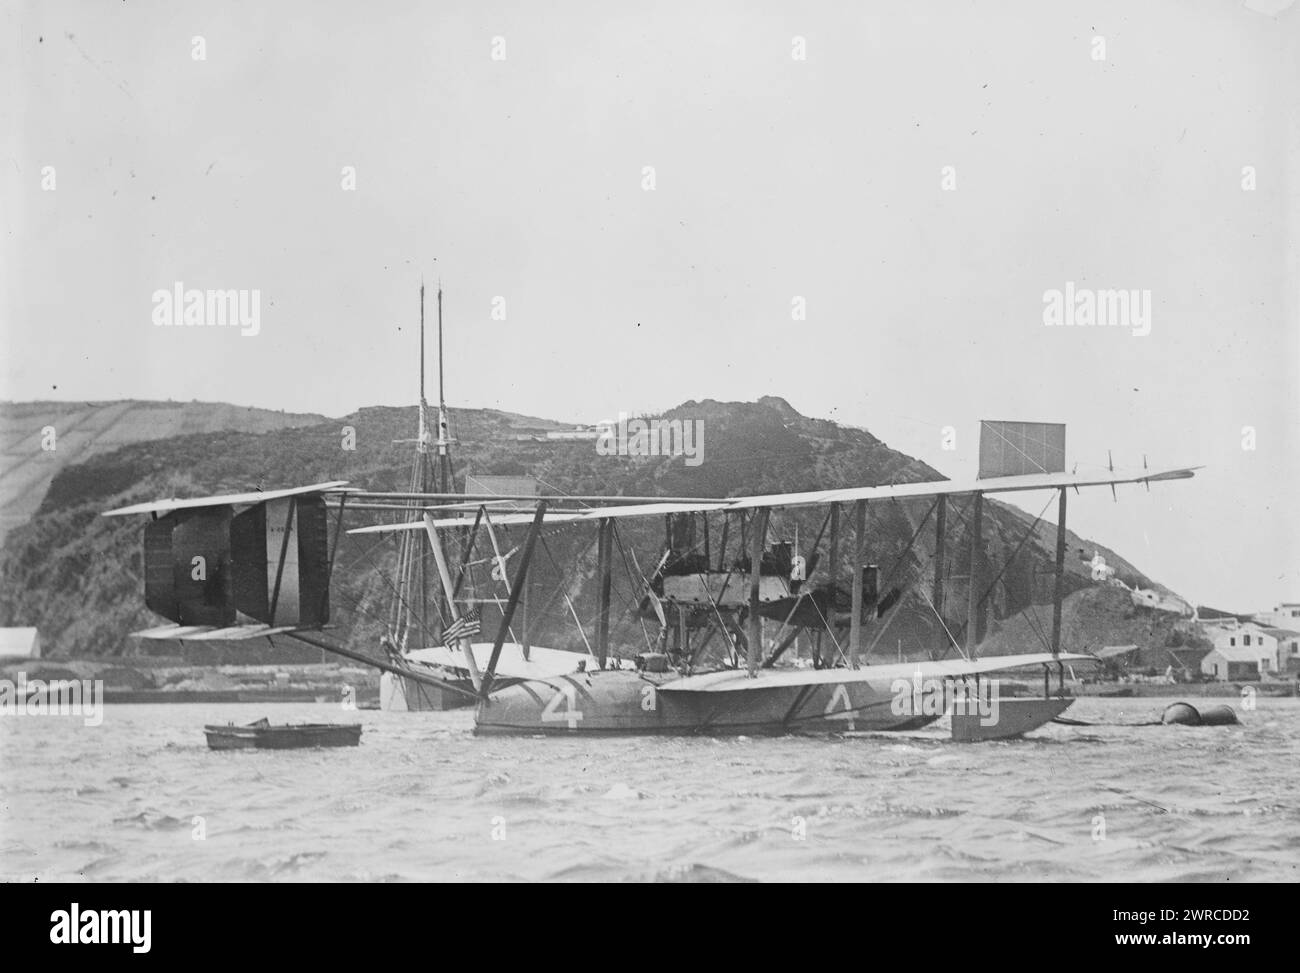 NC-4 at Horta, Photograph shows Navy-Curtiss Flying Boat NC-4 at Horta, the Azores, Portugal after its first trans-Atlantic journey in 1919., 1919, Glass negatives, 1 negative: glass Stock Photo